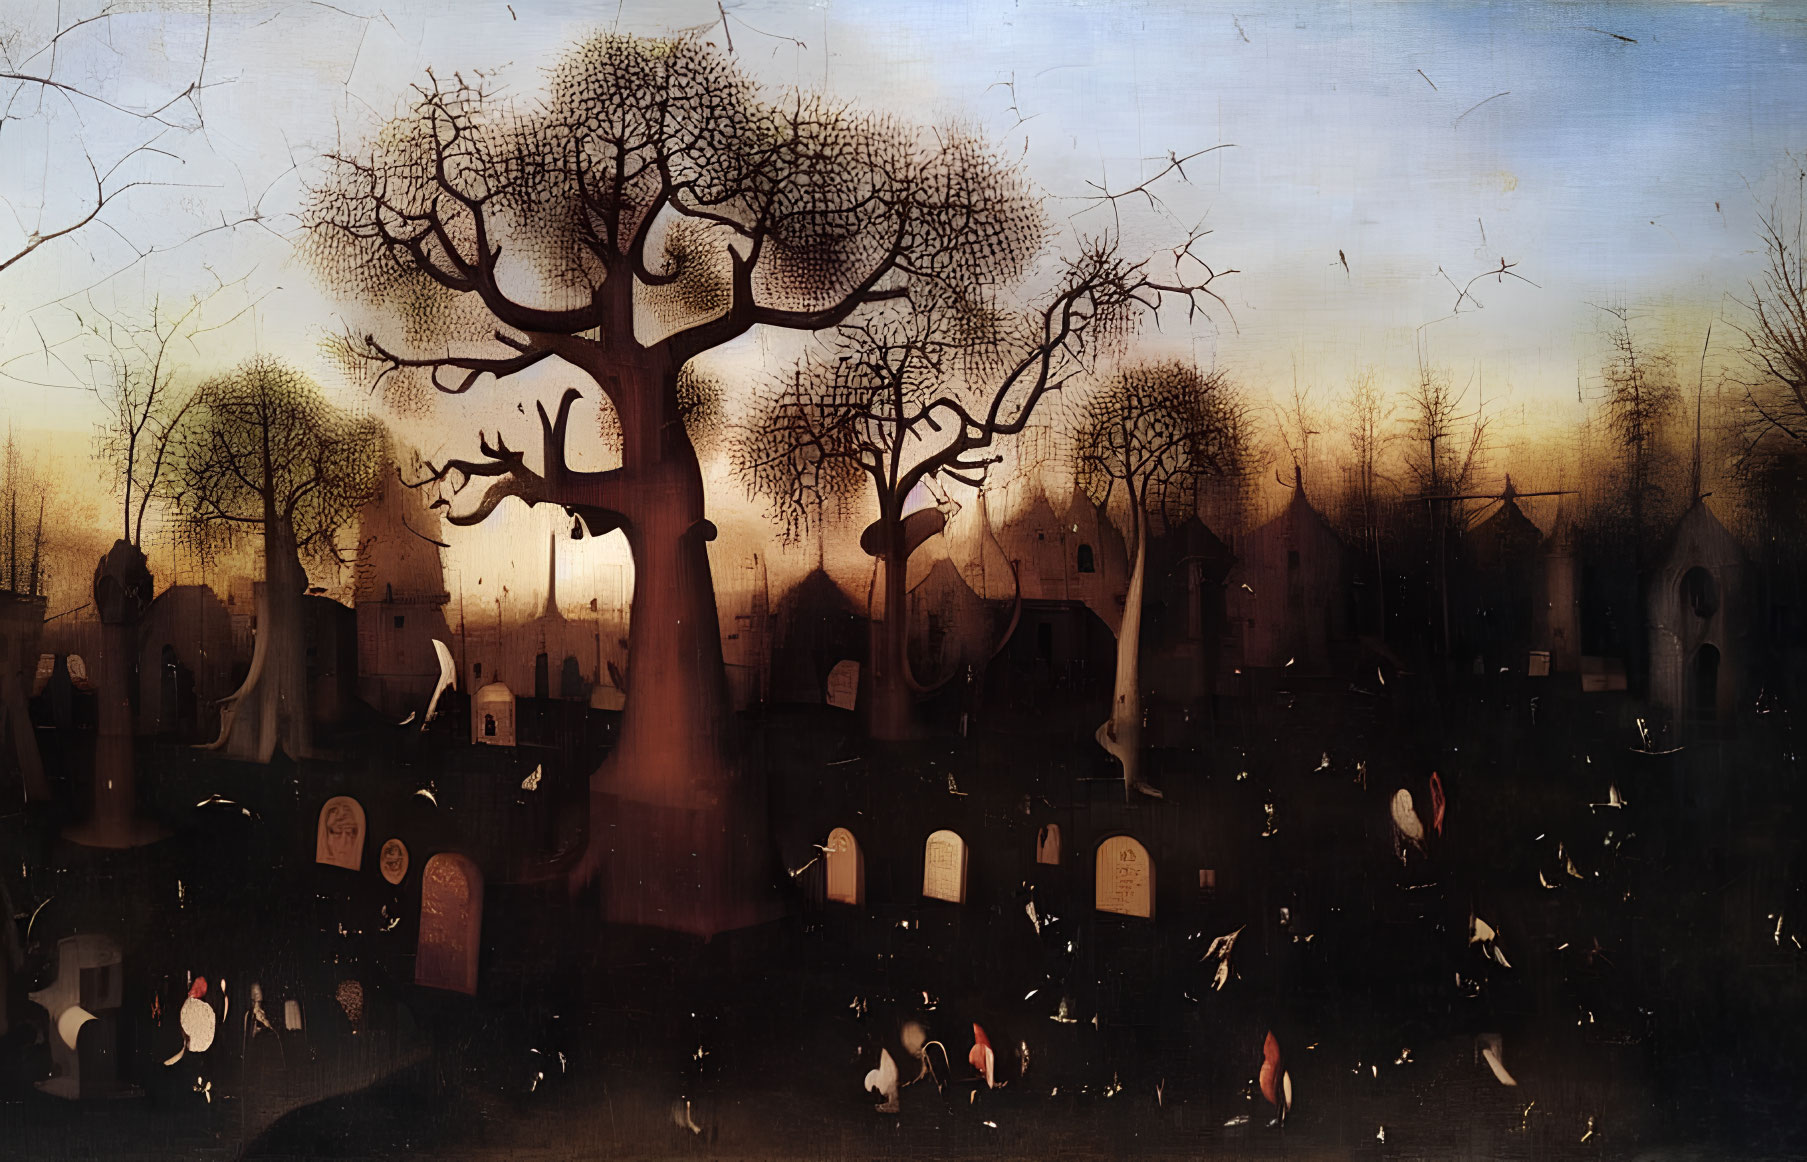 Twilight cemetery scene with leafless trees and gravestones